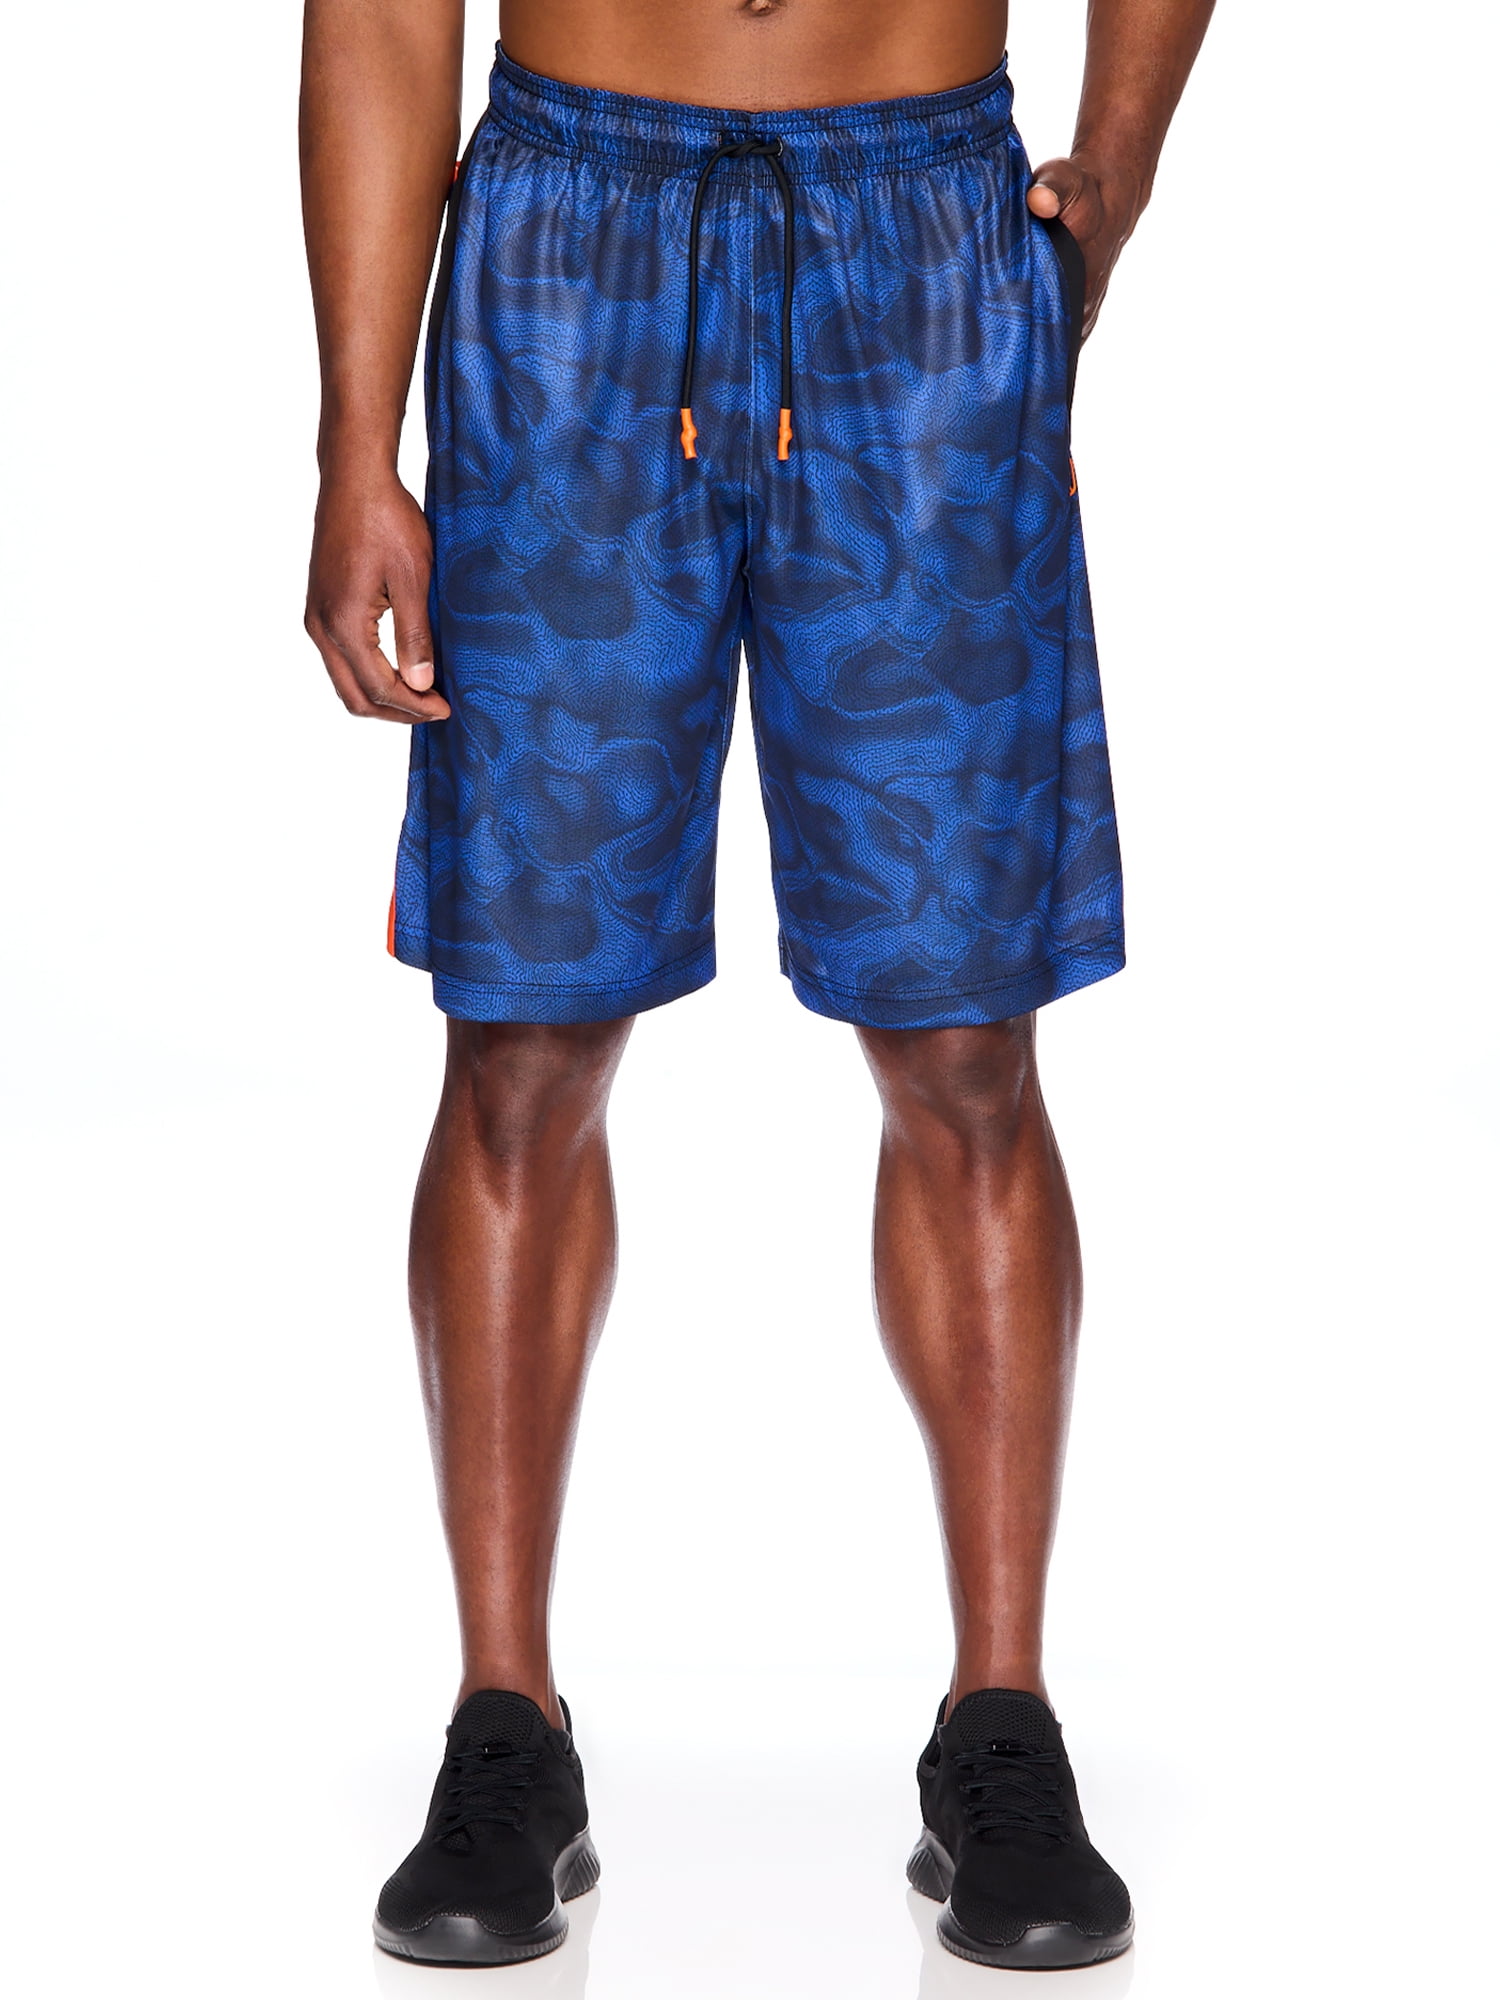 And1 Mens Post Up Basketball Shorts Swirl Print, Sizes S-3XL